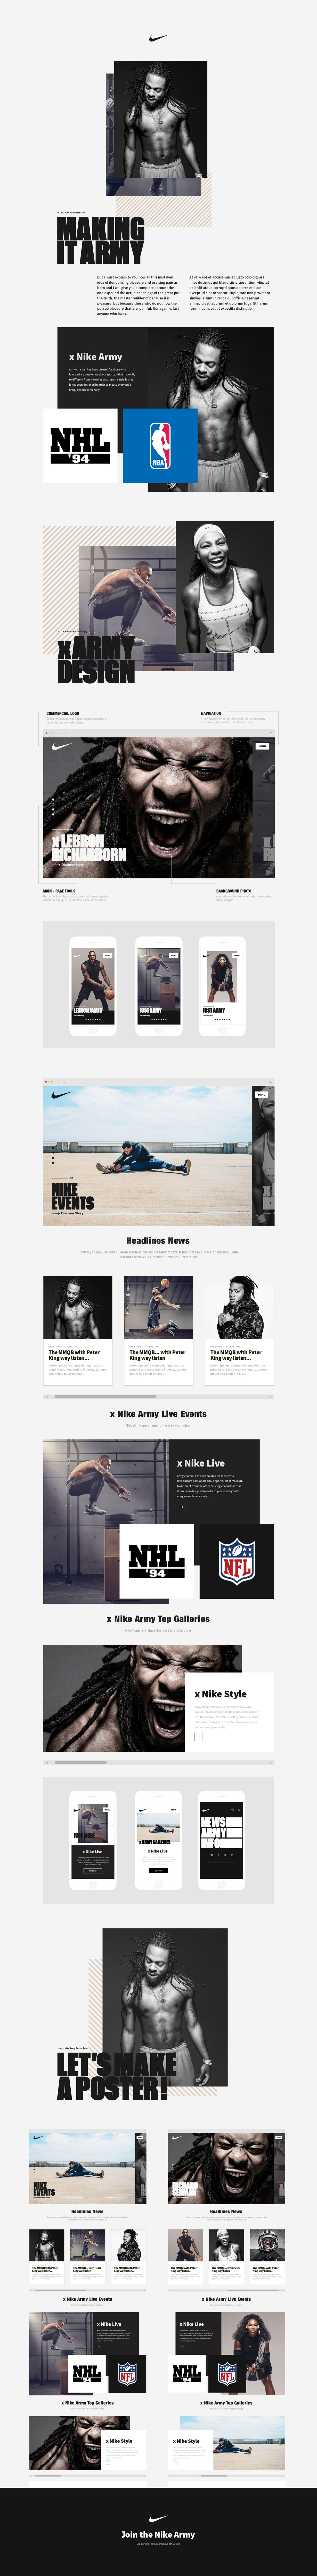 Nike army Web Design  ux UI Interaction design  sports nike sports Advertising  commercial